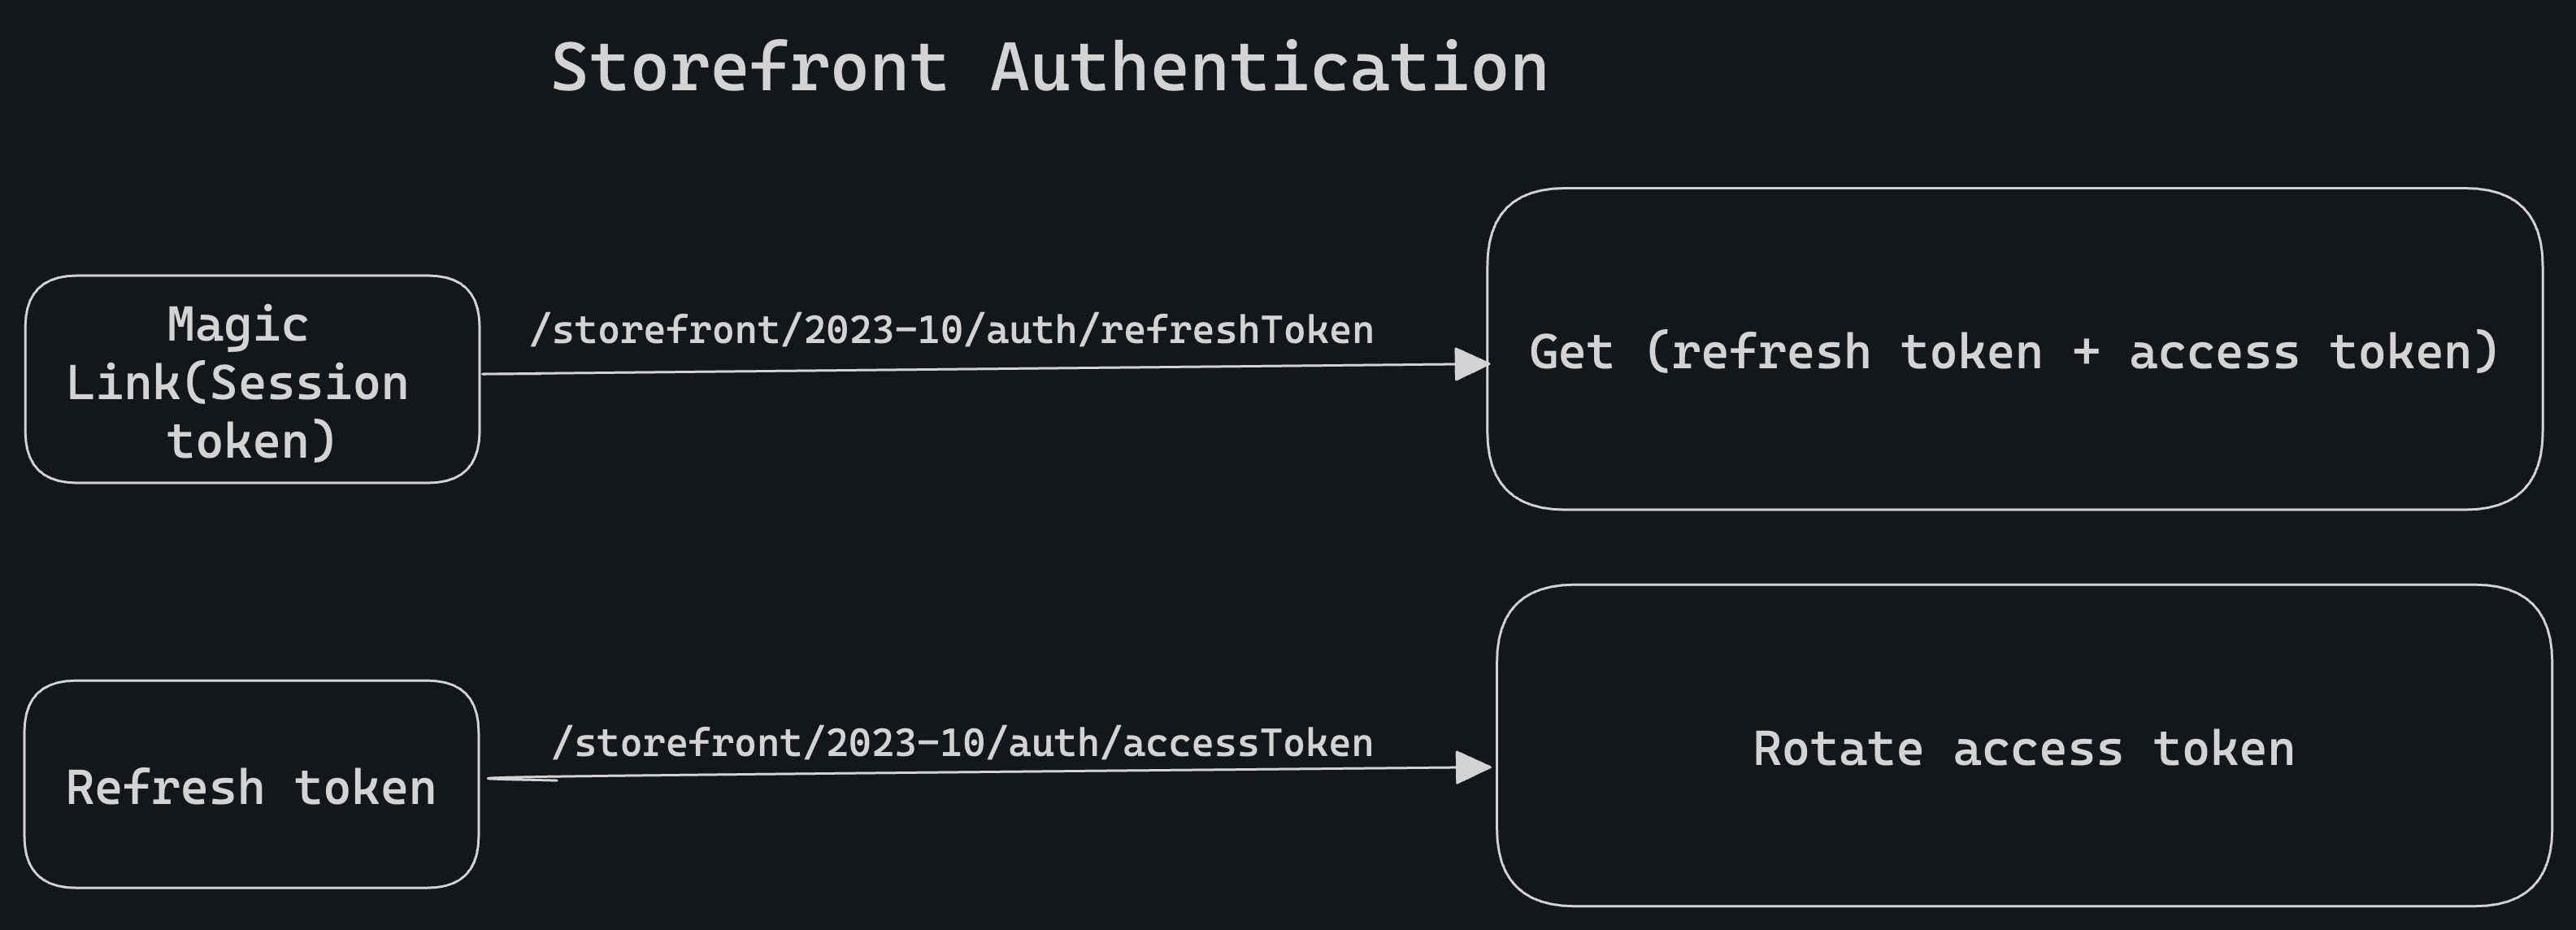 Storefront Auth Flow